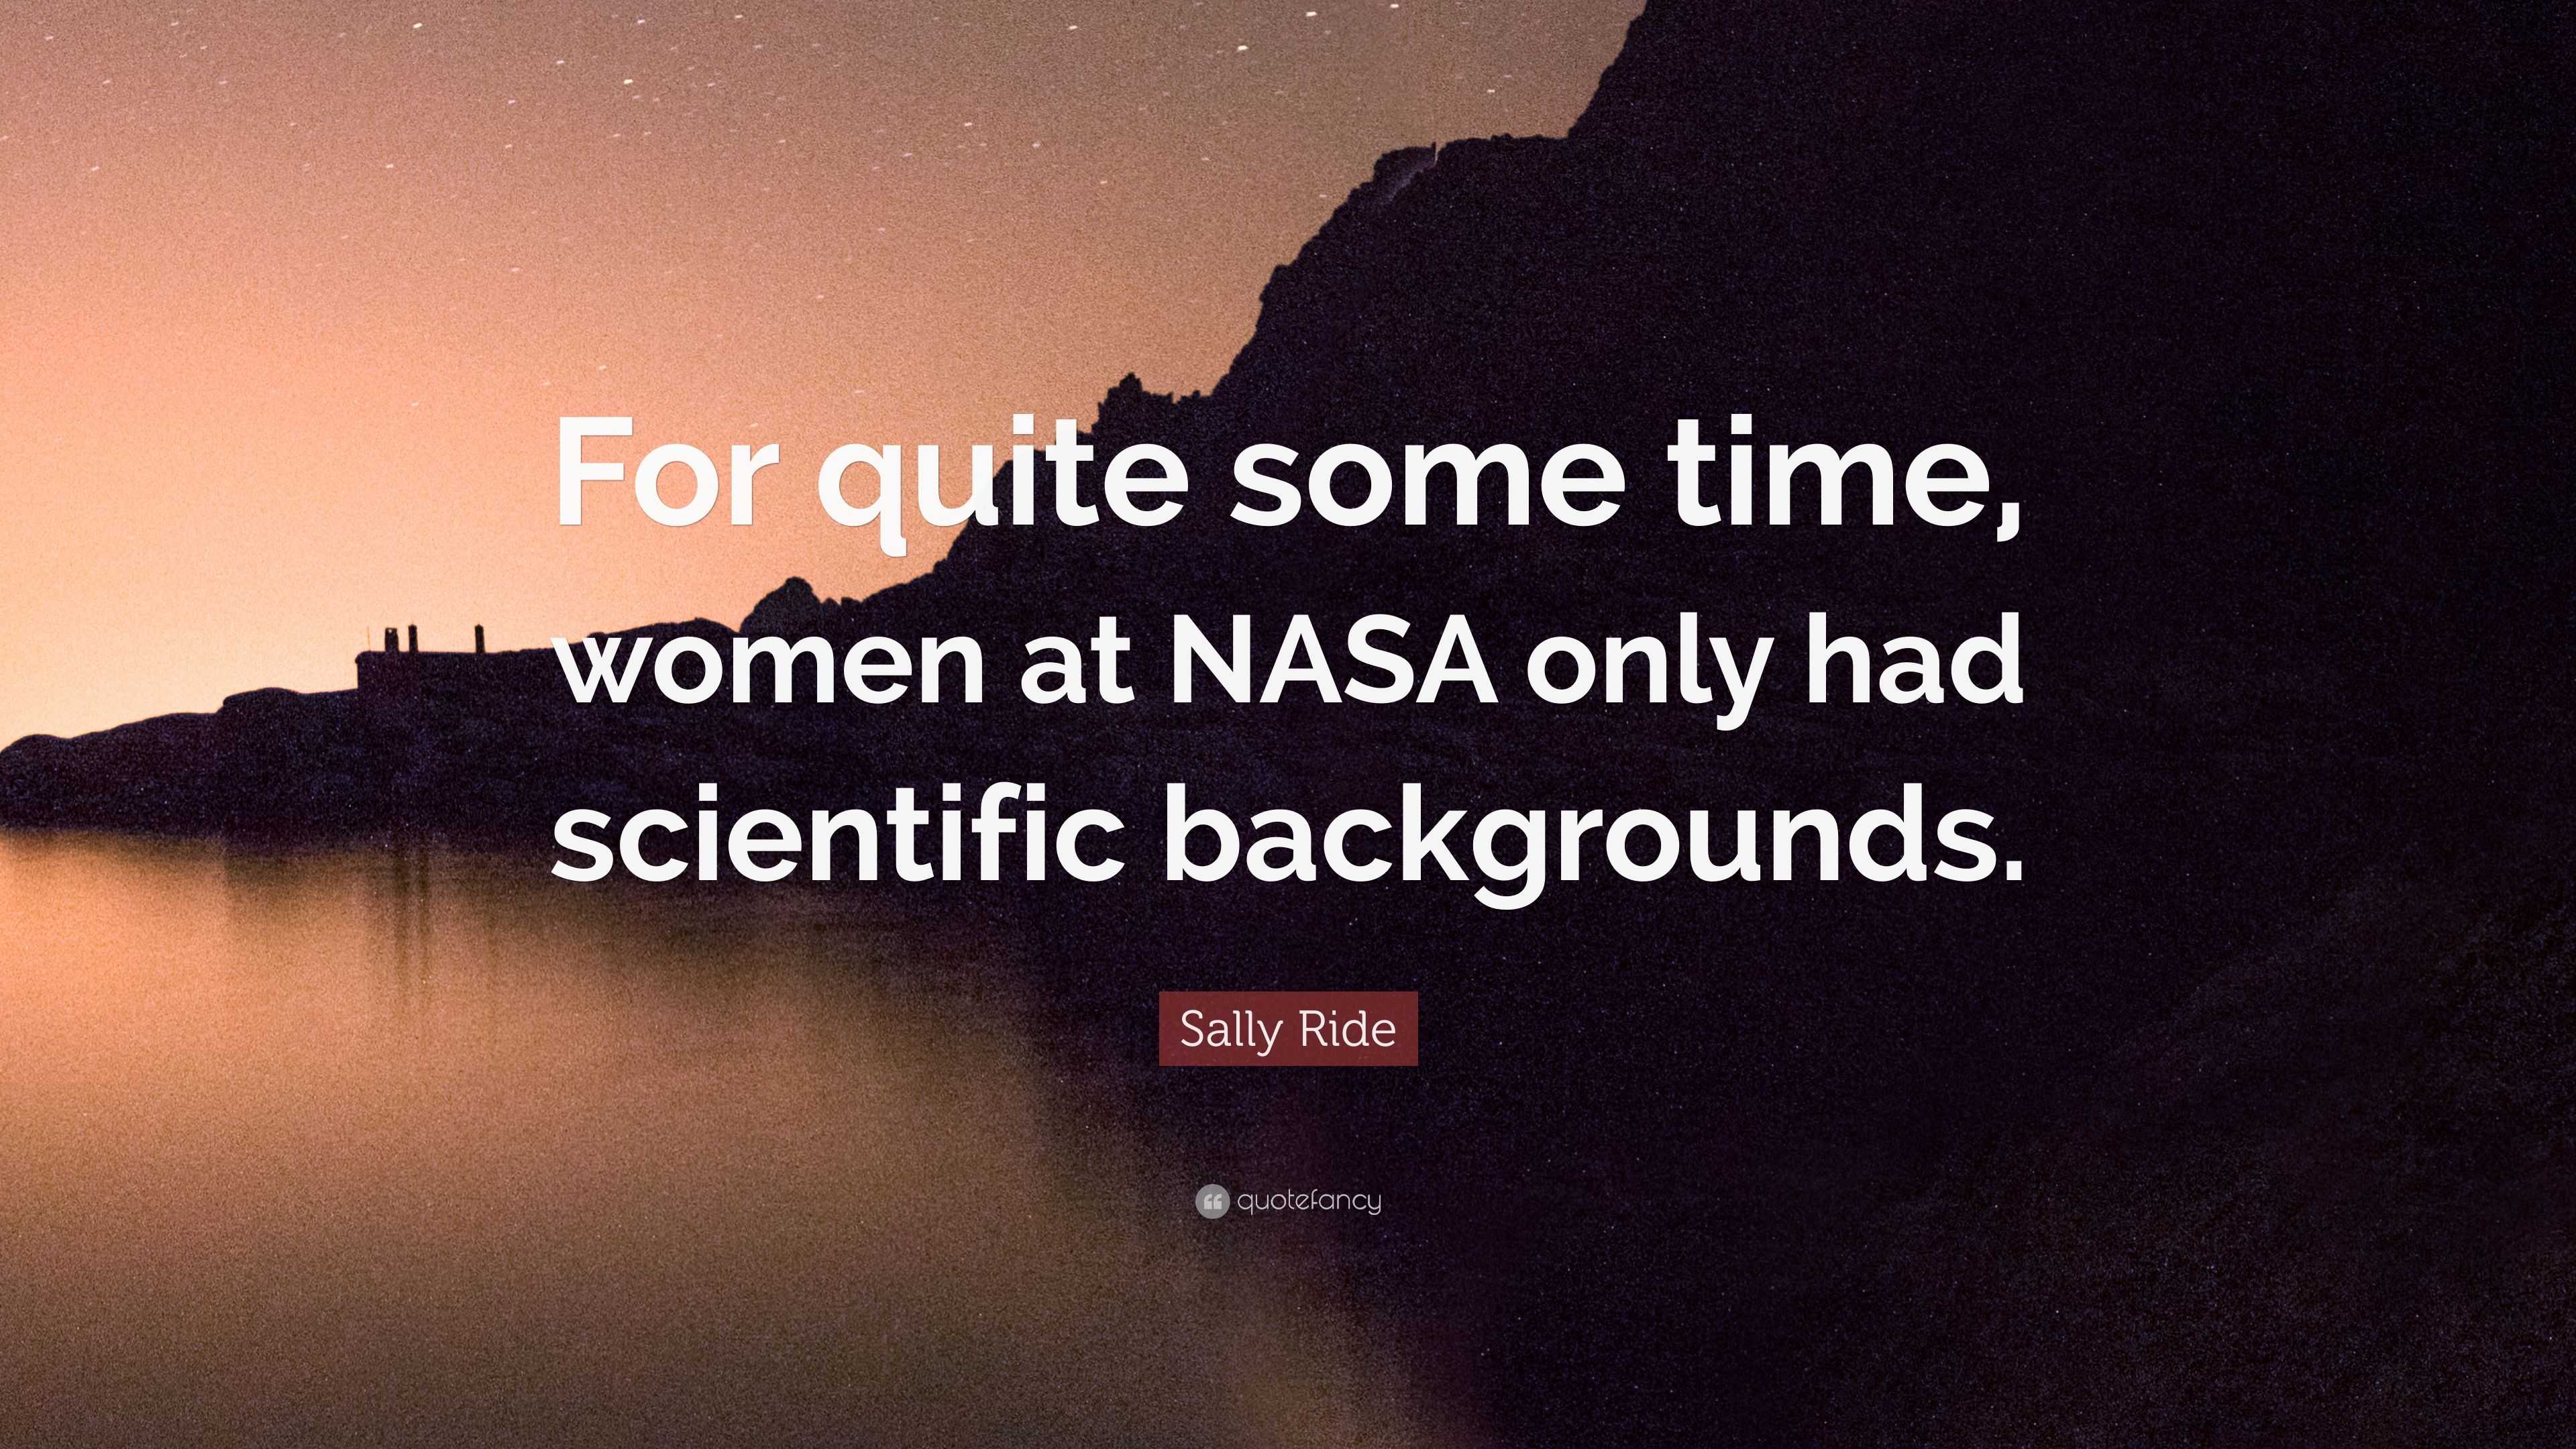 Sally Ride Quote: “For quite some women at NASA only had backgrounds.”